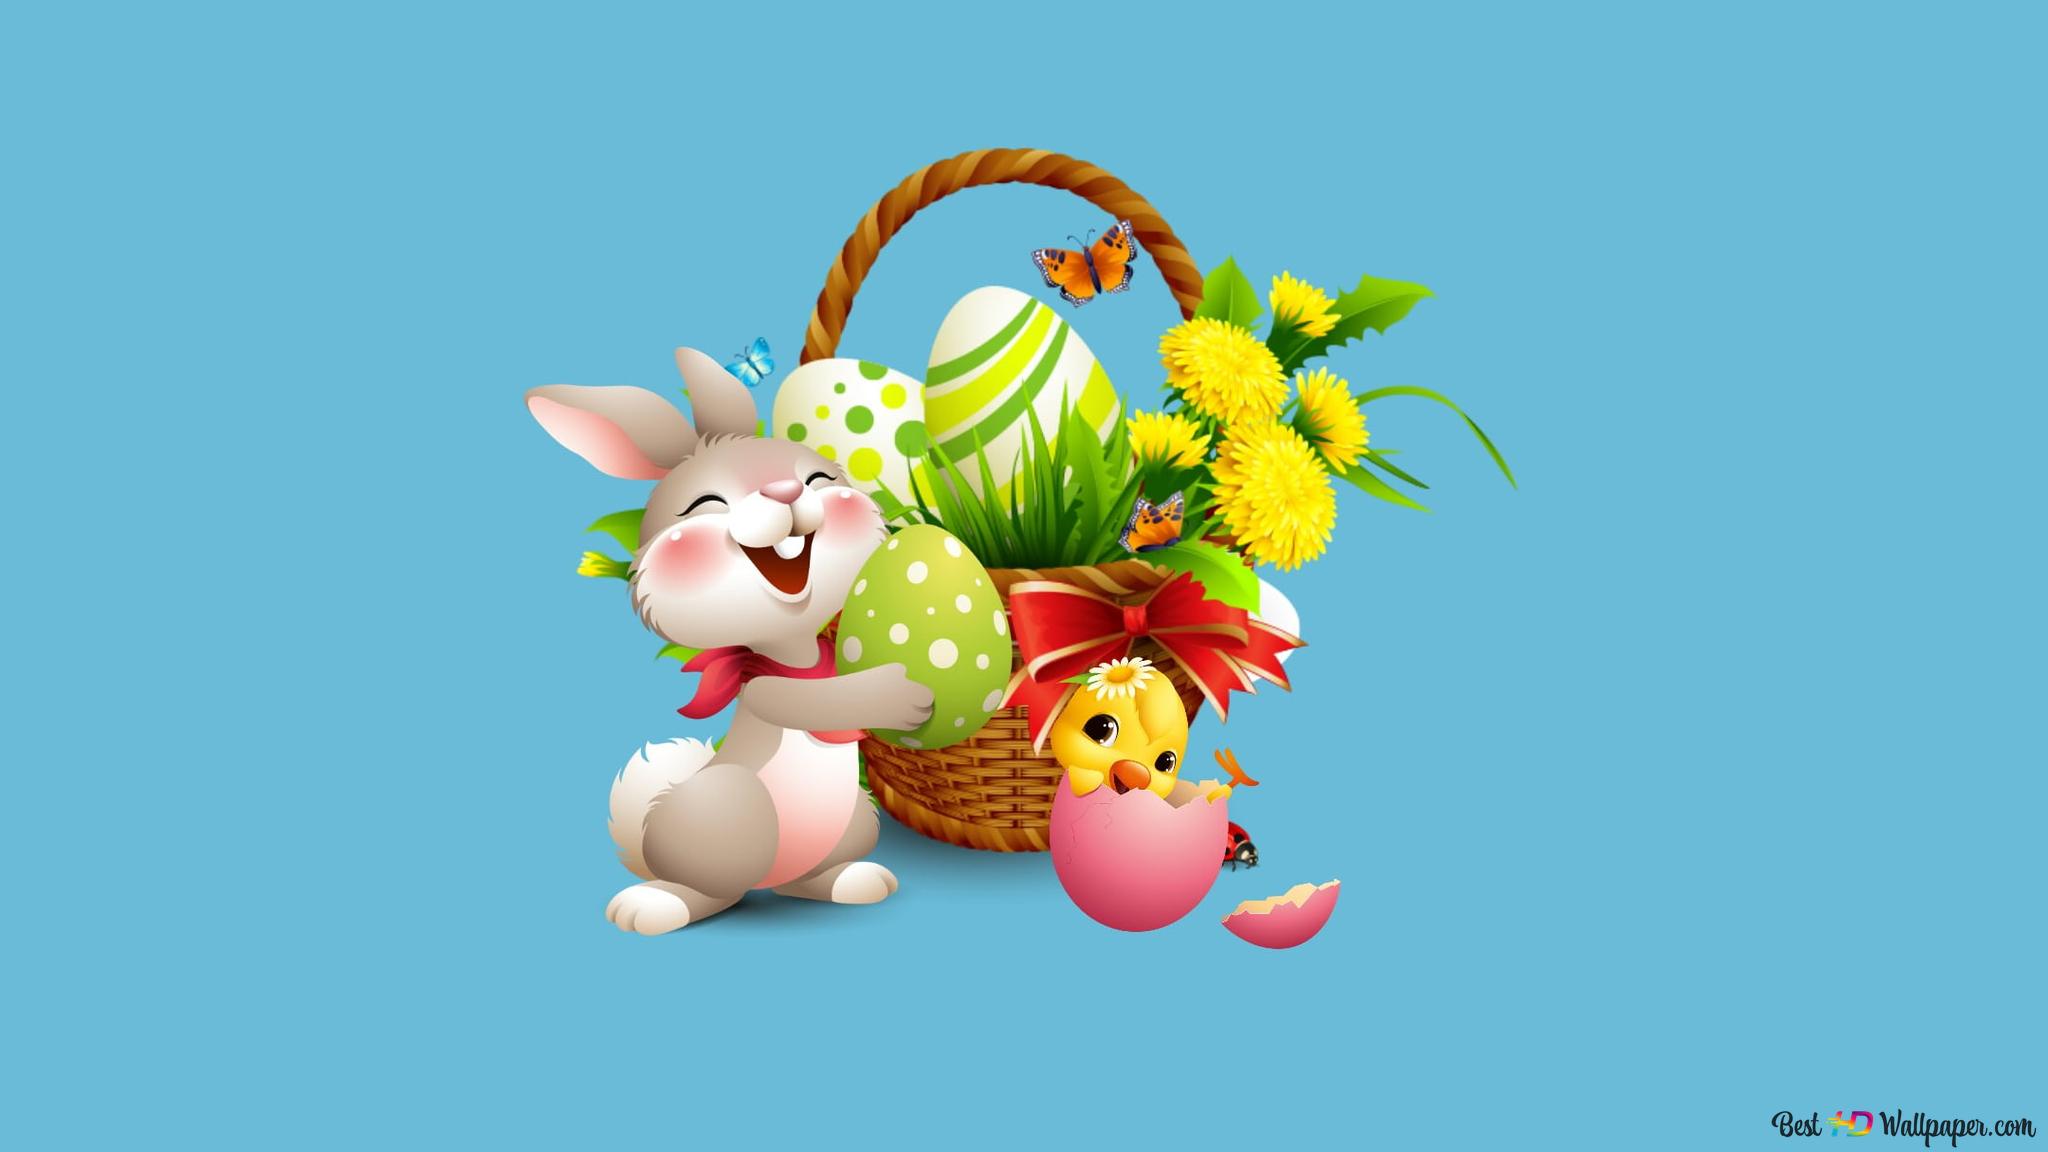 Happy Easter day cartoon and flowers 2K wallpaper download